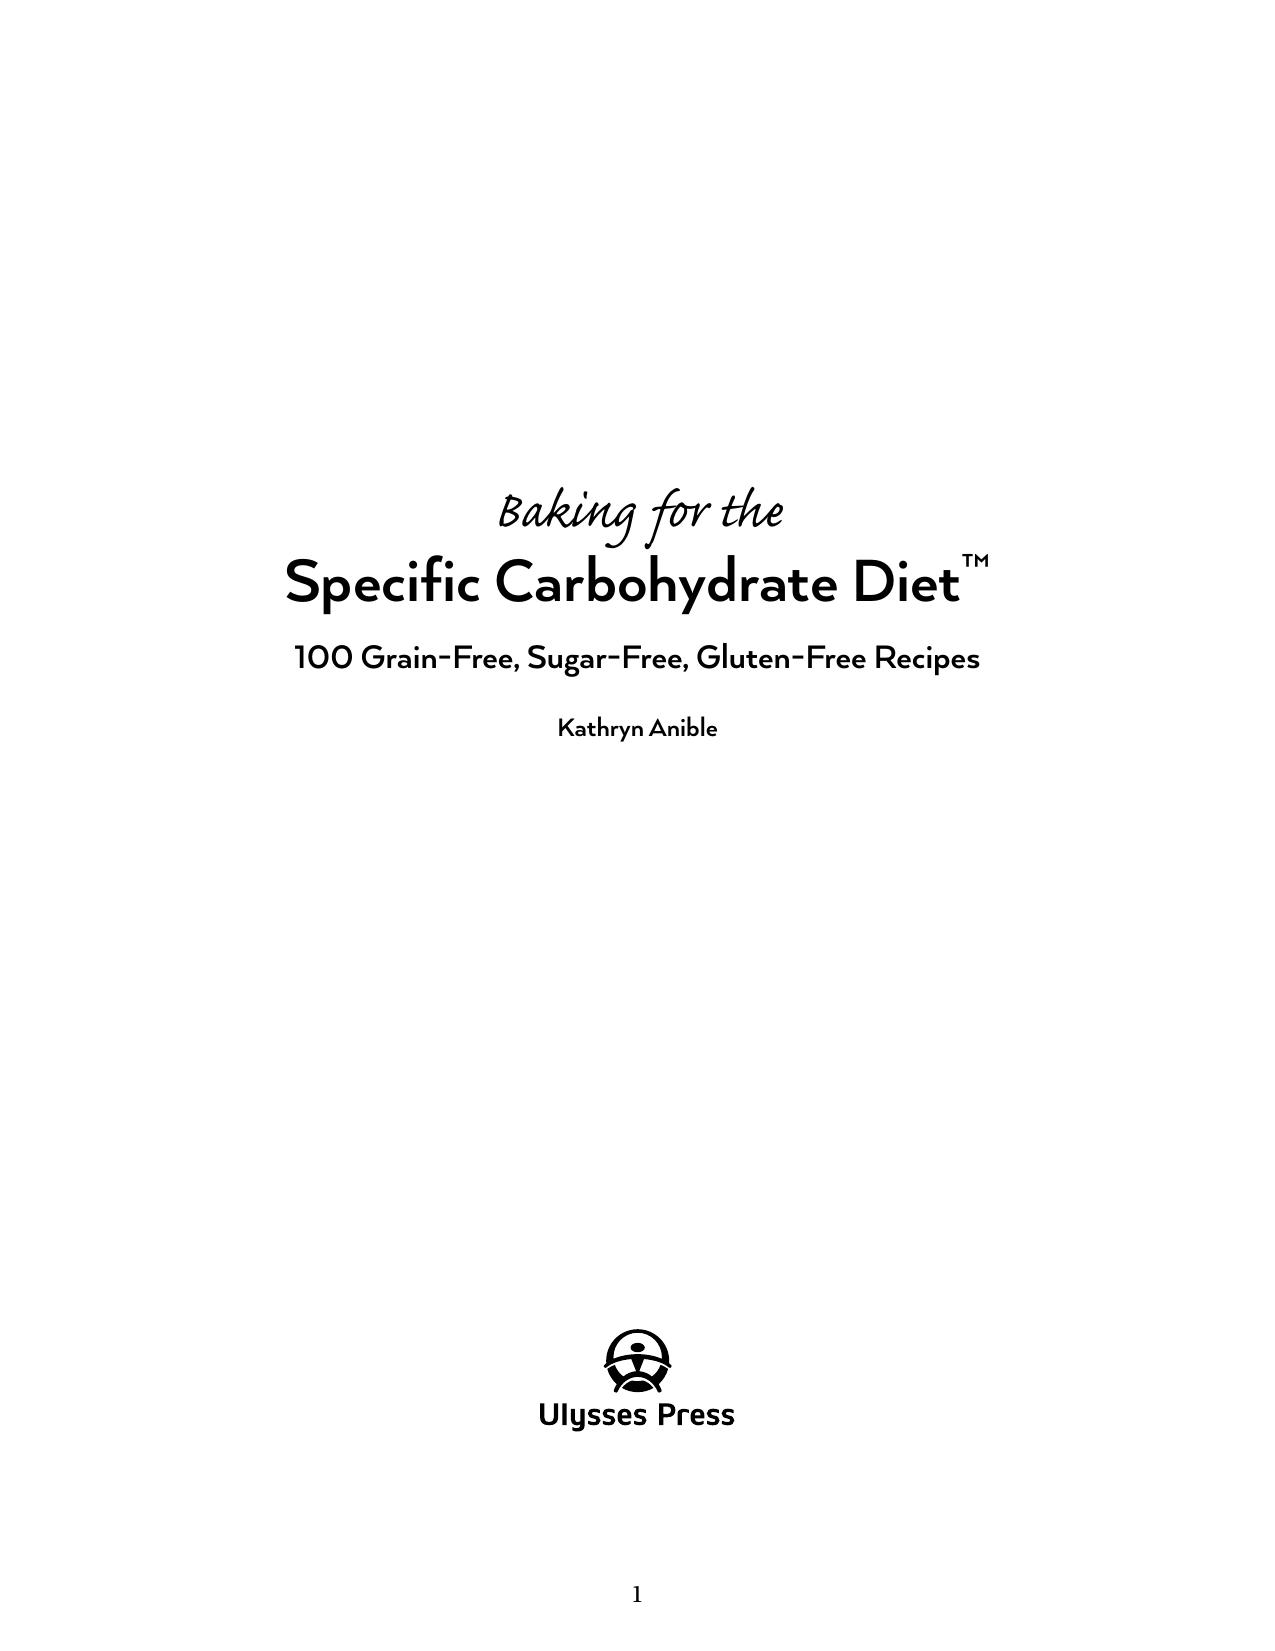 Baking for the Specific Carbohydrate Diet by Kathryn Anible